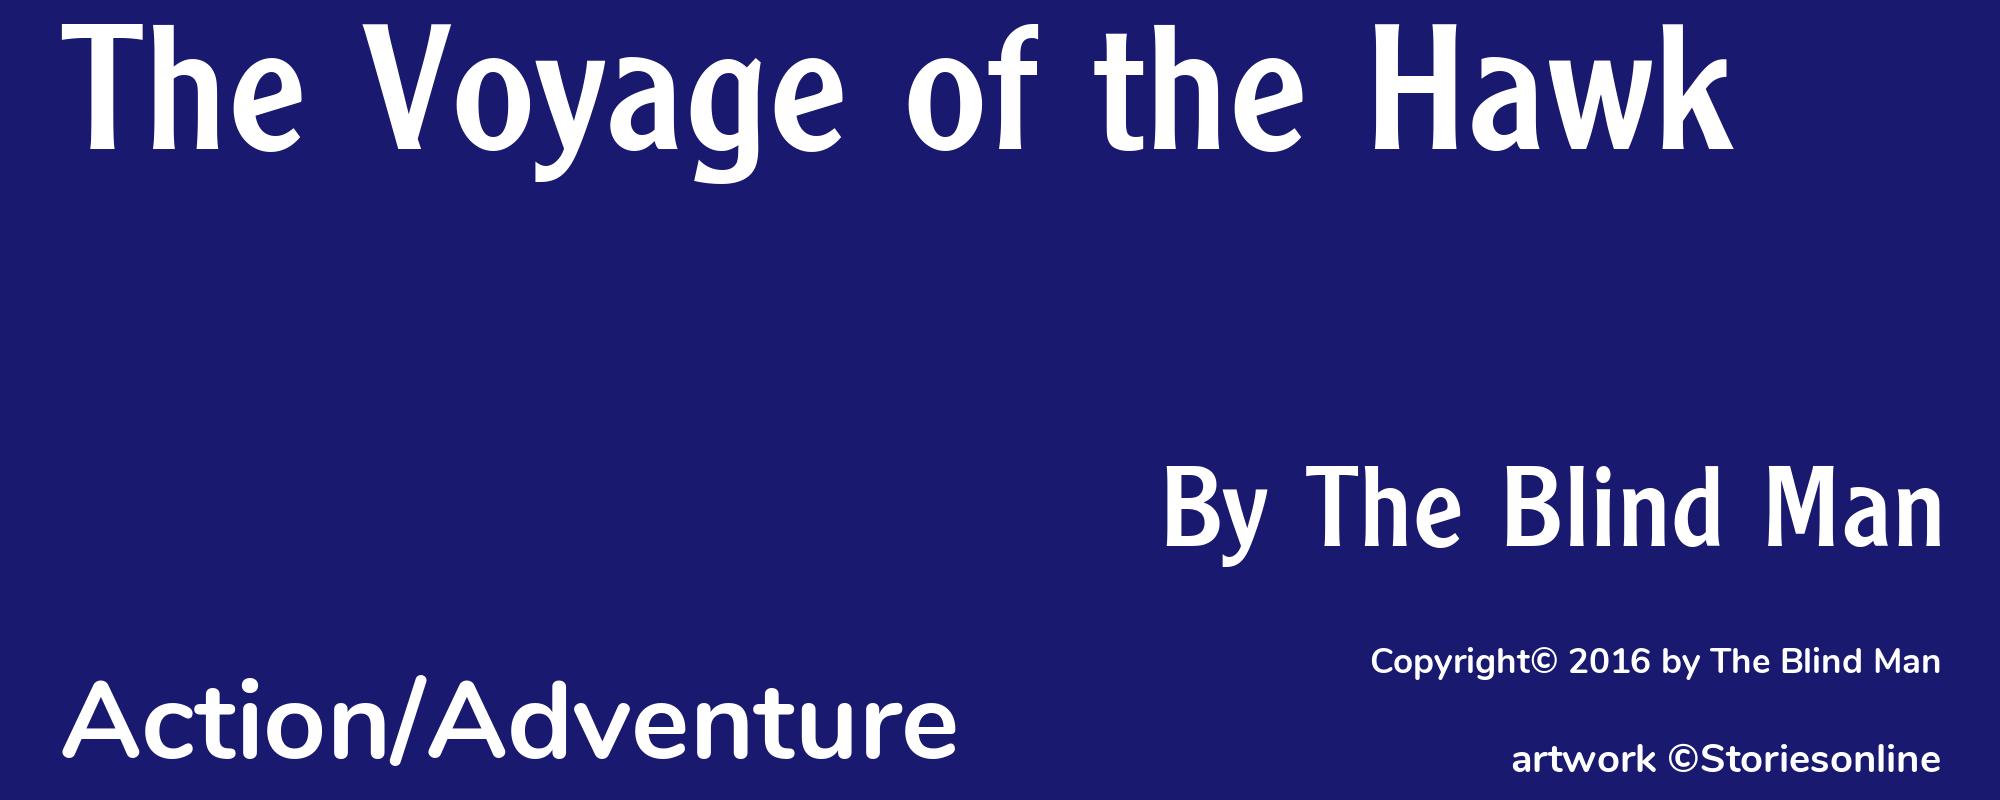 The Voyage of the Hawk - Cover